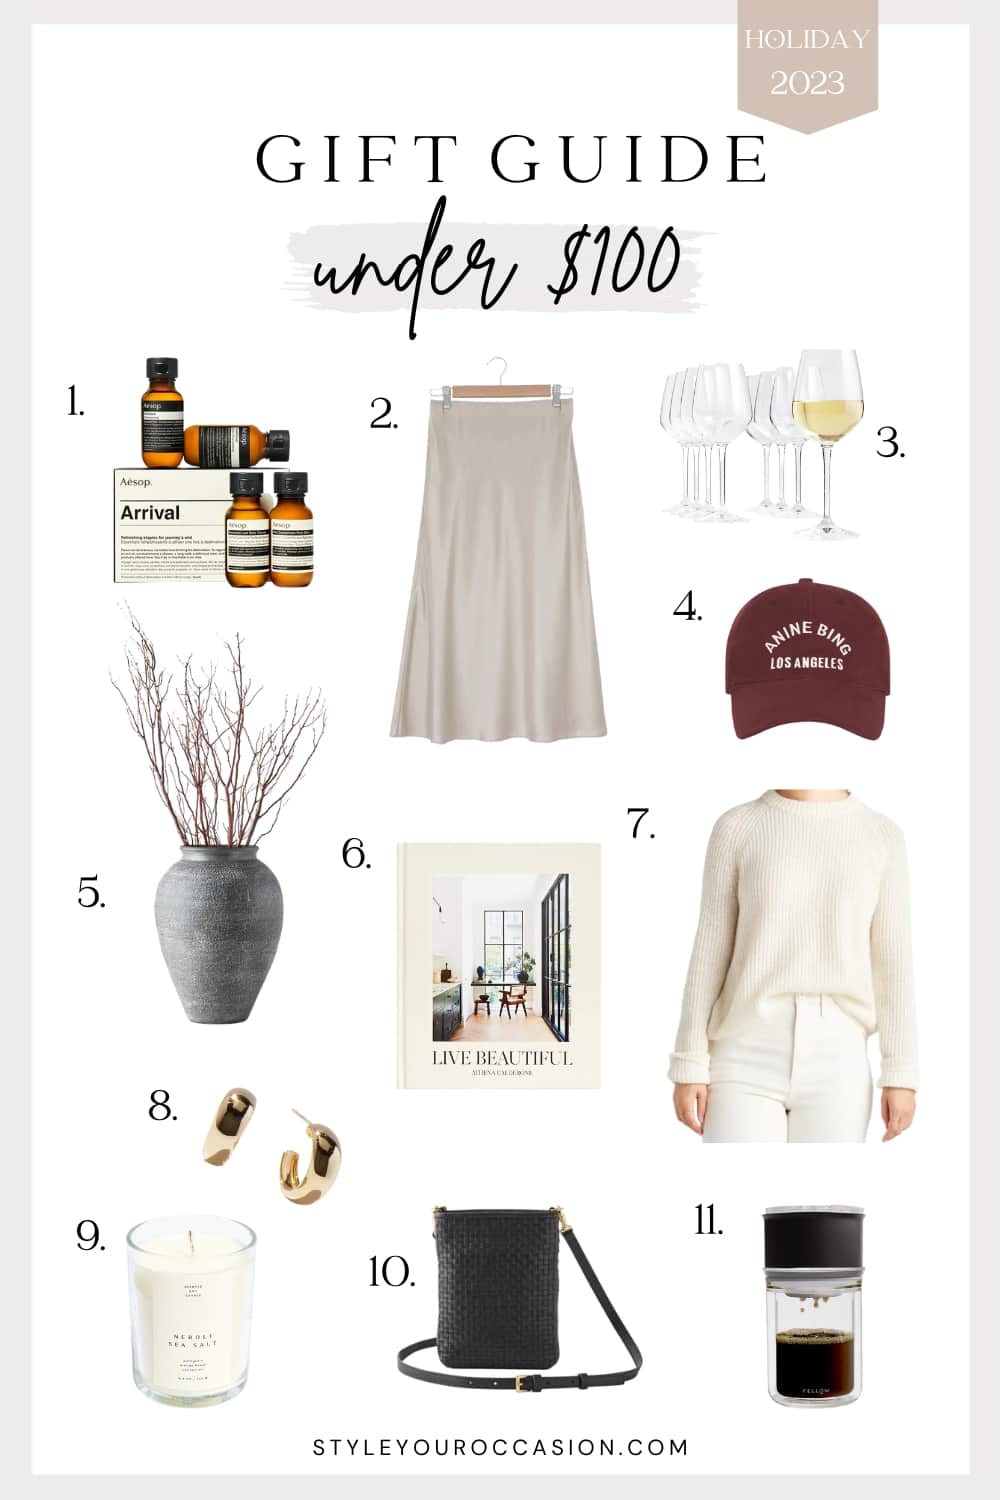 An image board with holiday gift ideas under $100, including clothing, a purse, a coffee maker, glassware, and more